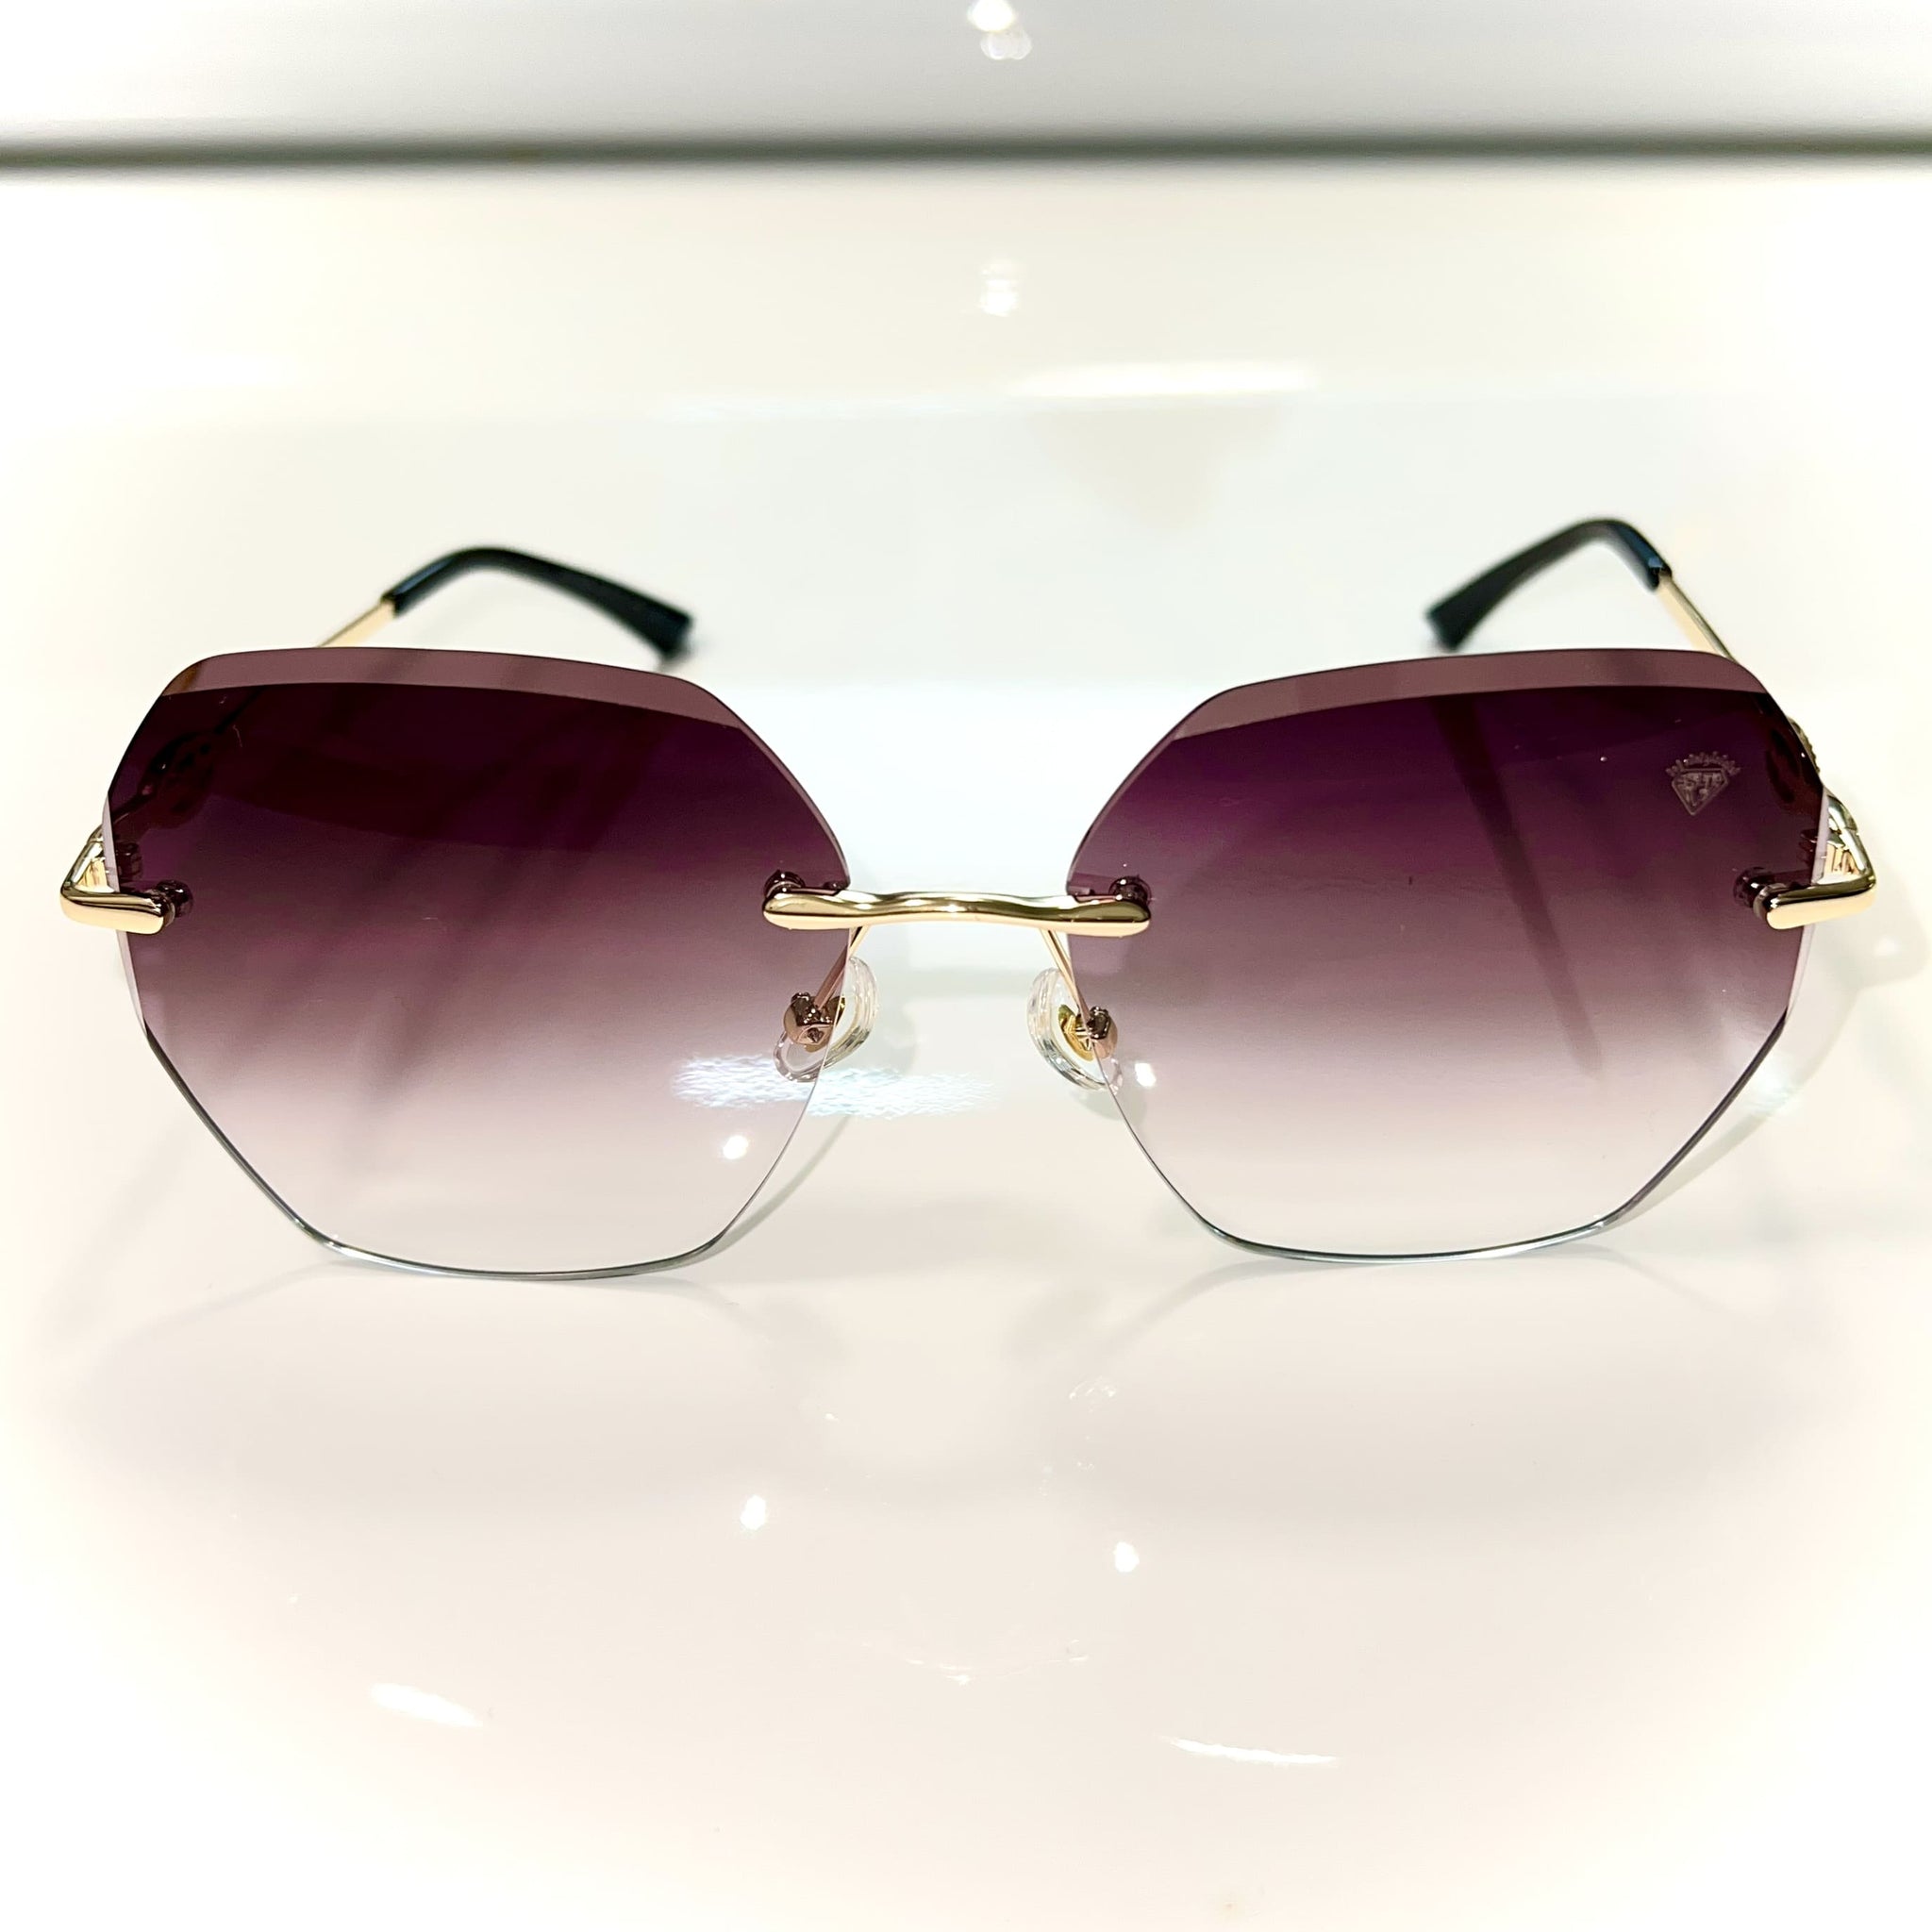 Egyptian Eye Glasses - "For Her" - 14 carat gold plated - Bordeaux Shade- Sehgal Glasses